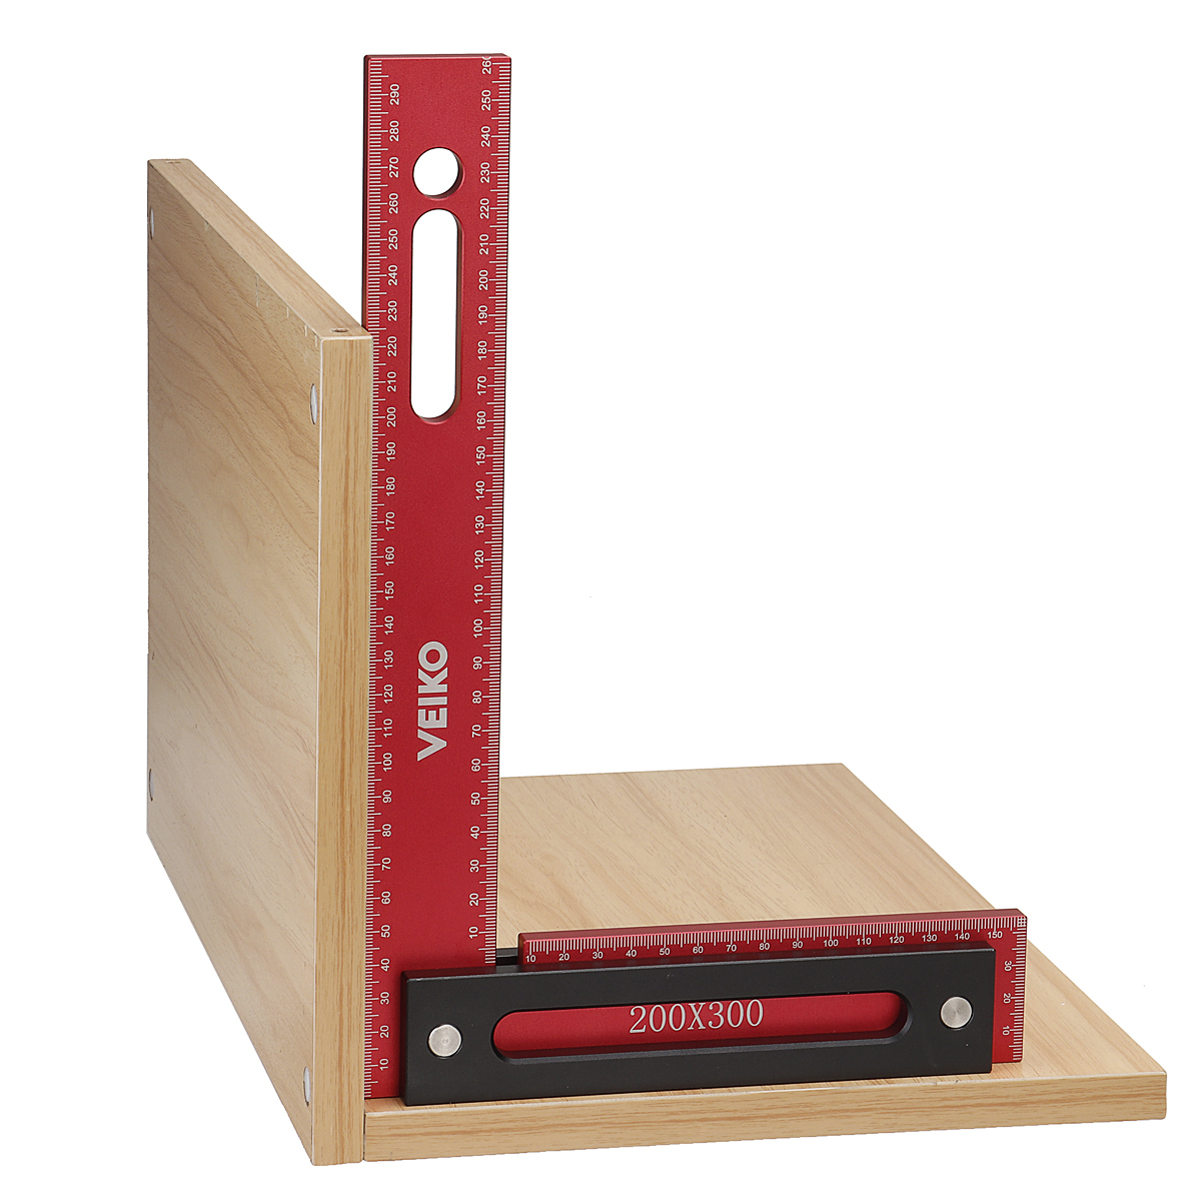 VEIKO-300x200mm-Aluminum-Alloy-Precision-Woodworking-Square-Right-Angle-Ruler-with-Base-1910992-4